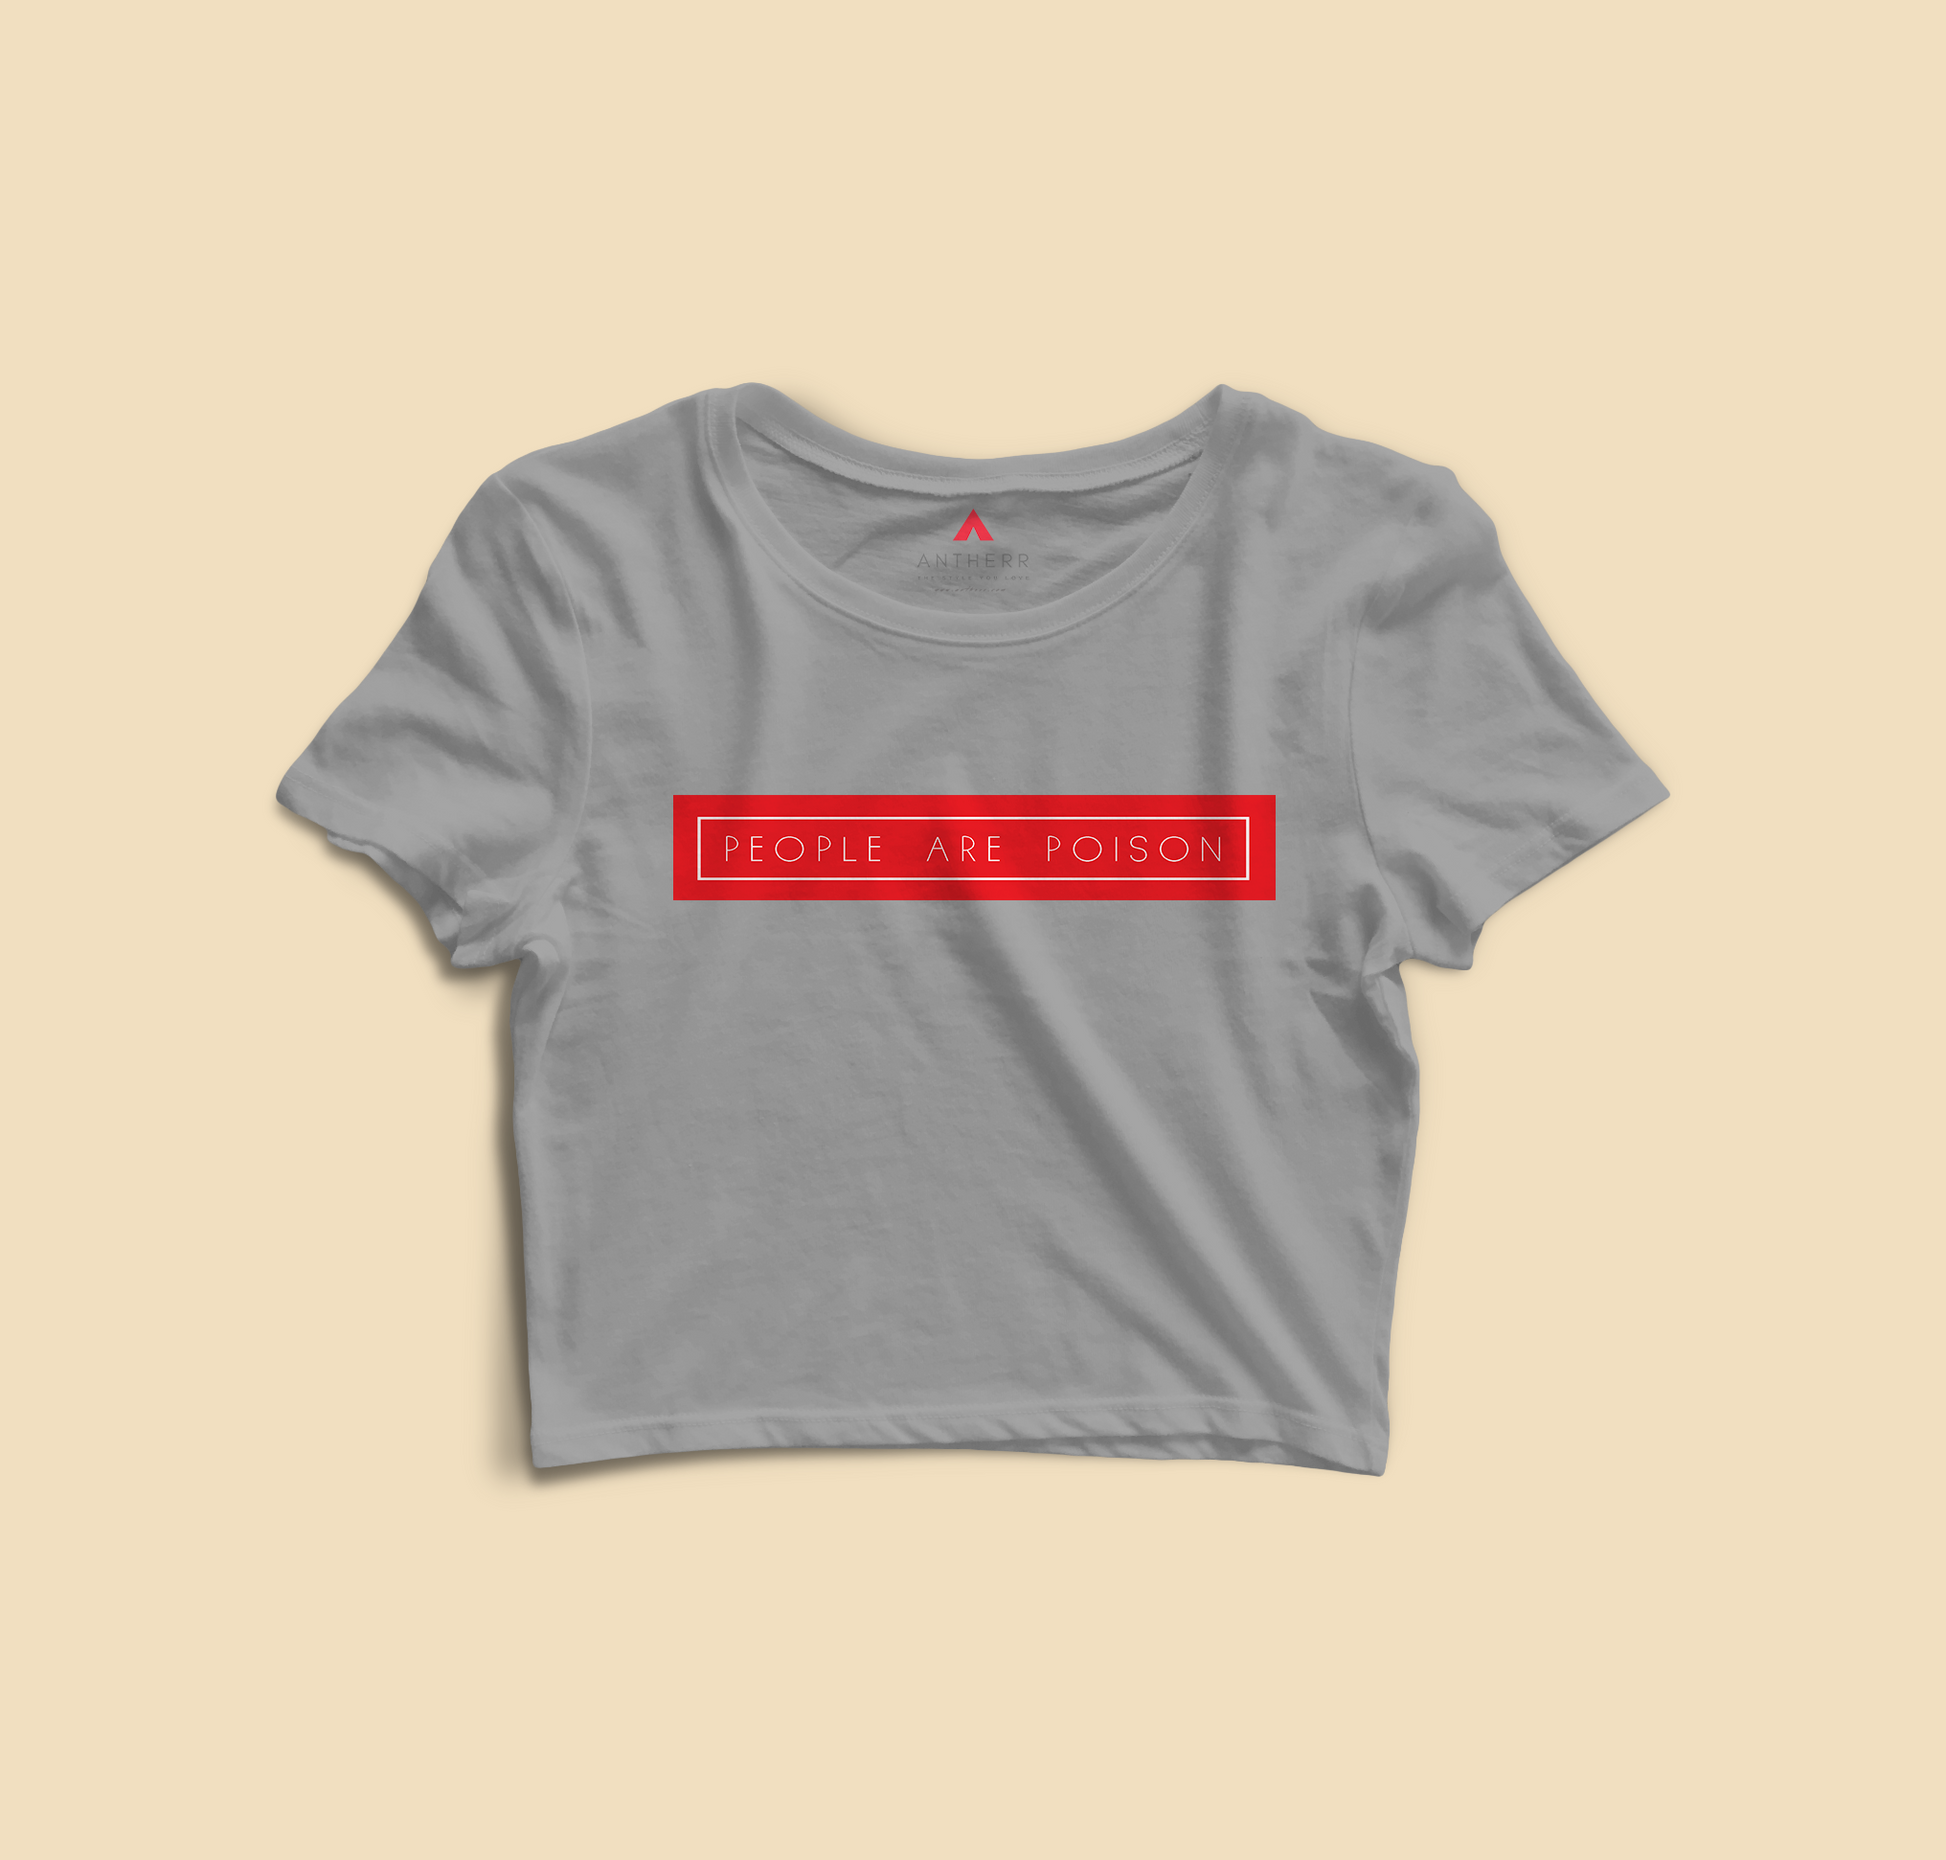 "PEOPLE ARE POISON" - HALF-SLEEVE T-SHIRT'S GREY